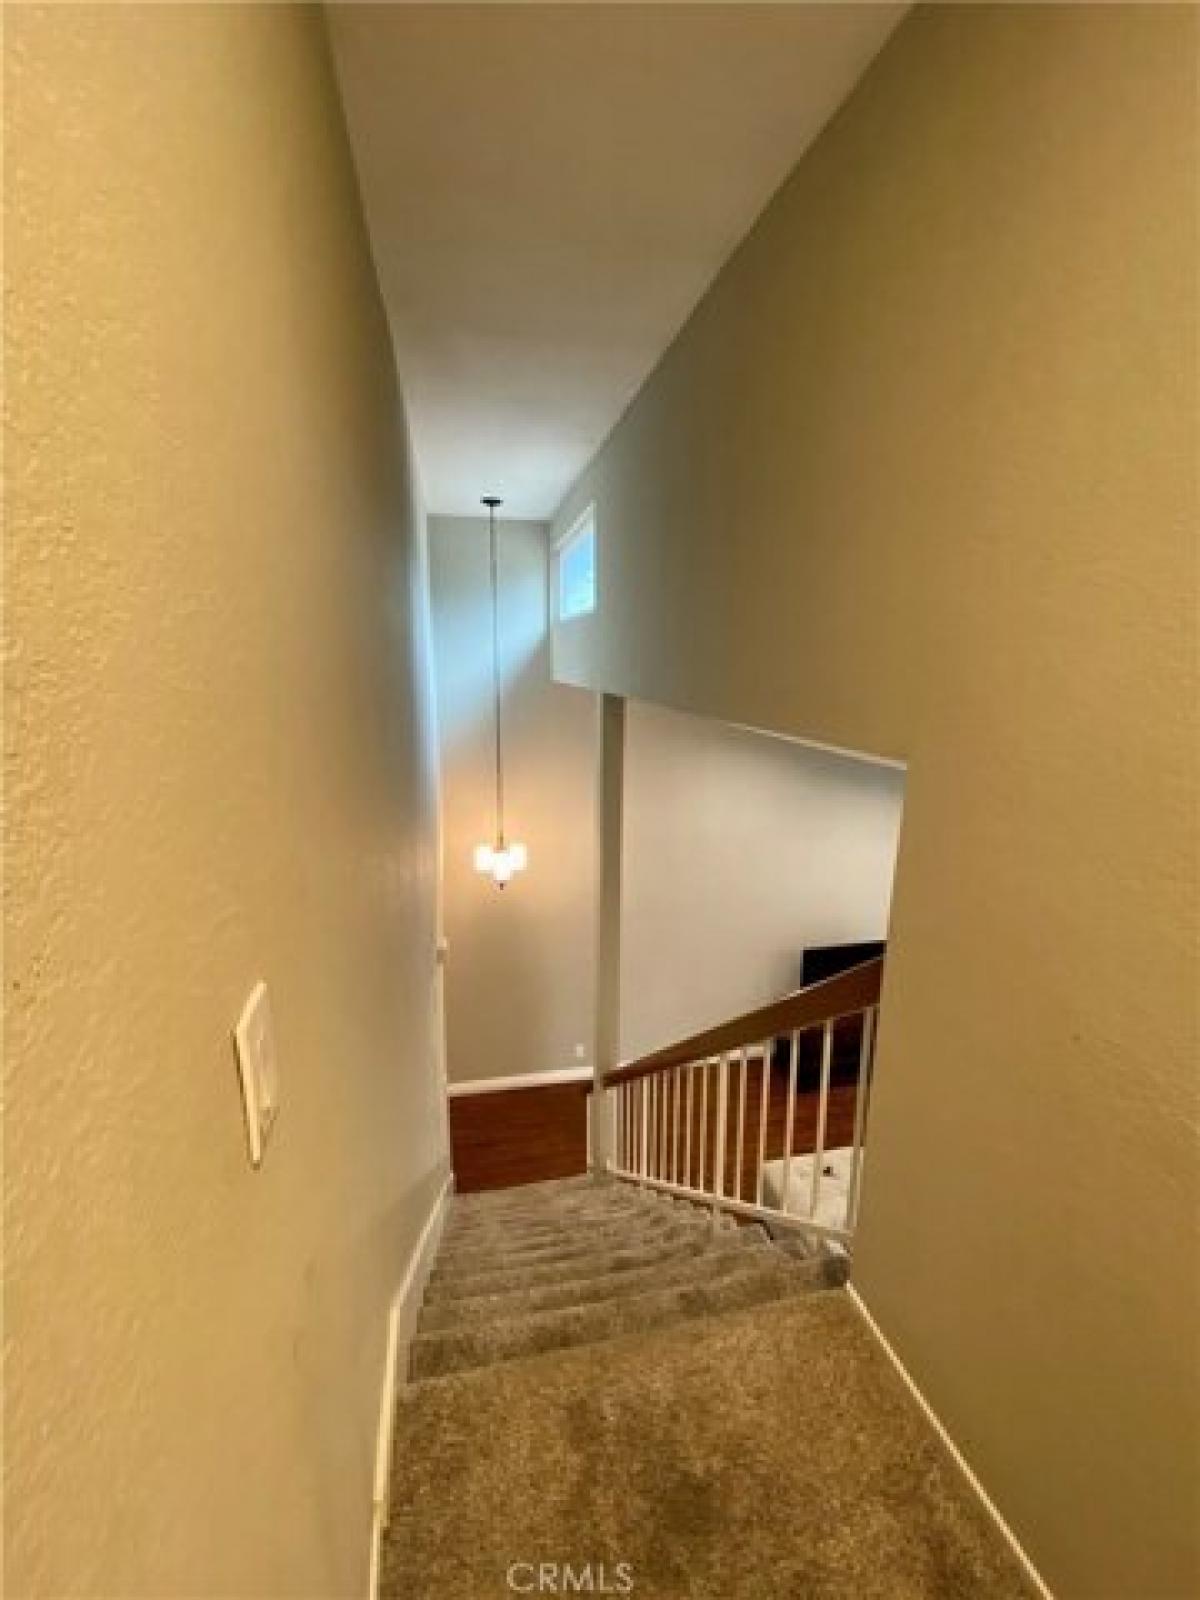 Picture of Home For Rent in Claremont, California, United States